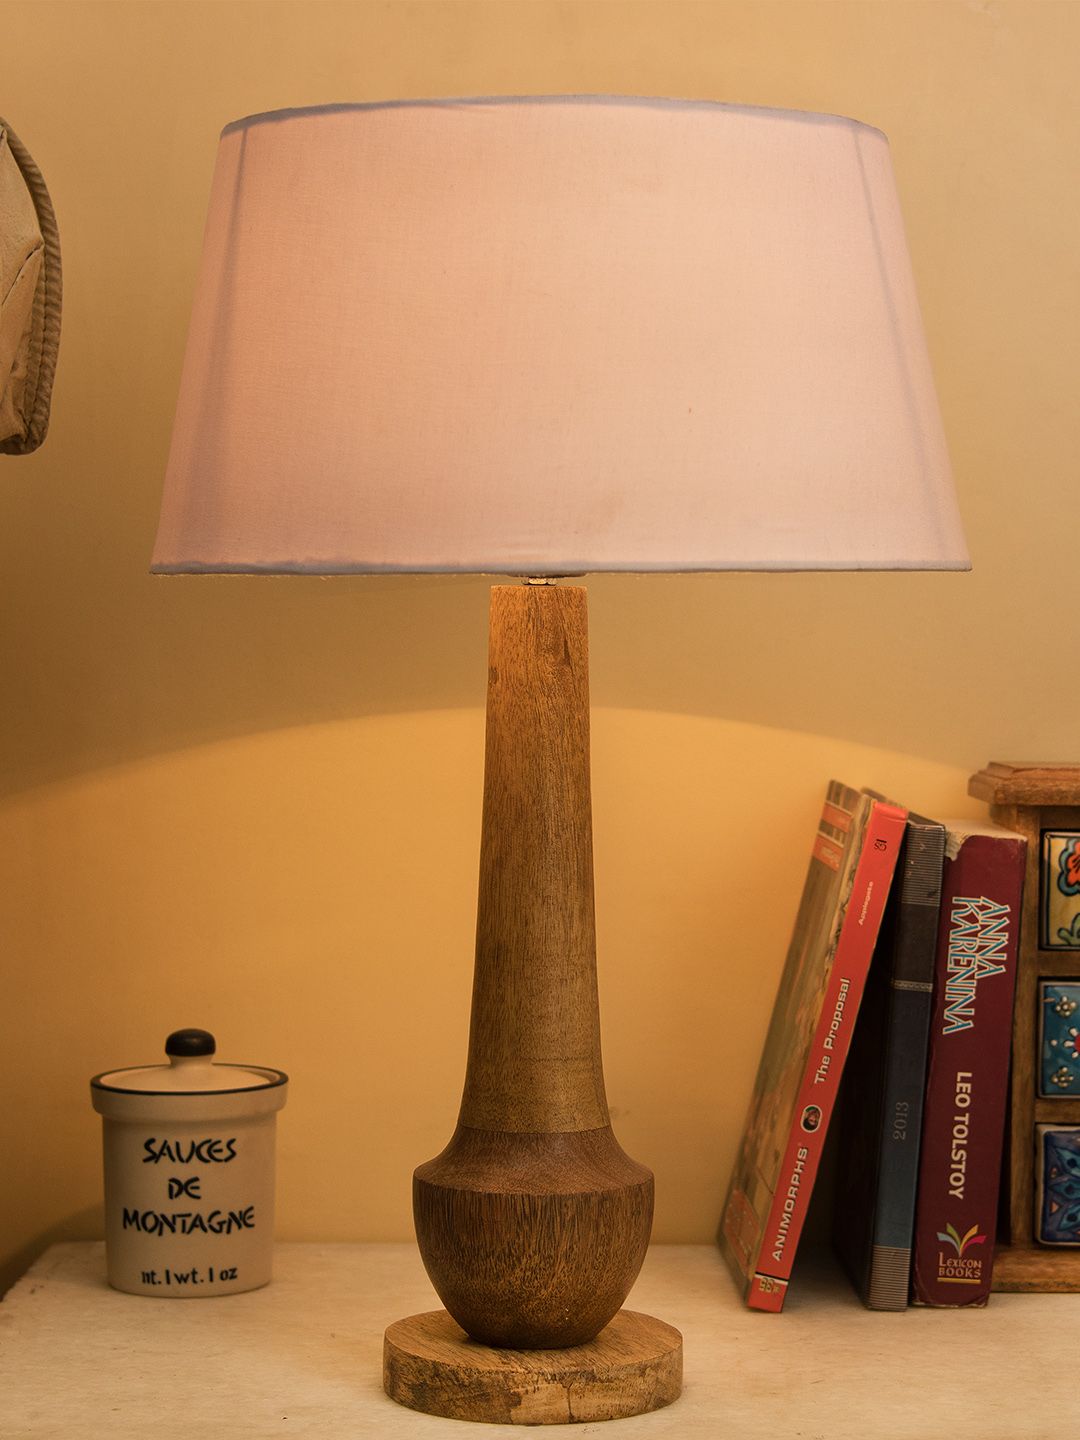 Homesake Brown & White Solid Handcrafted Bedside Standard Table Lamp with Shade Price in India